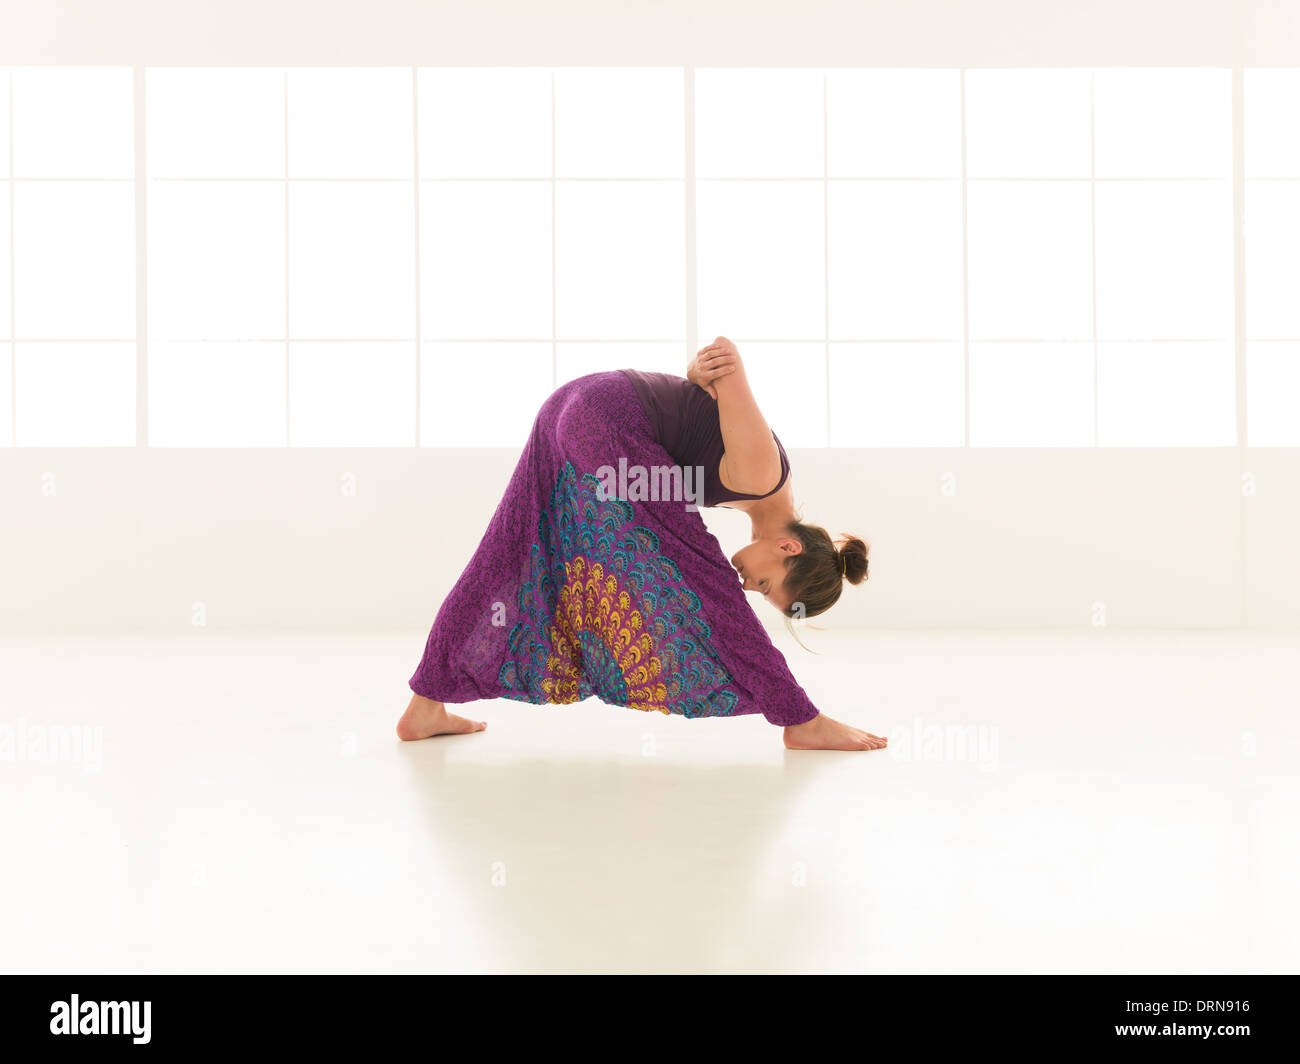 young, woman practicing yoga posture, with face obscured, indor shot Stock Photo